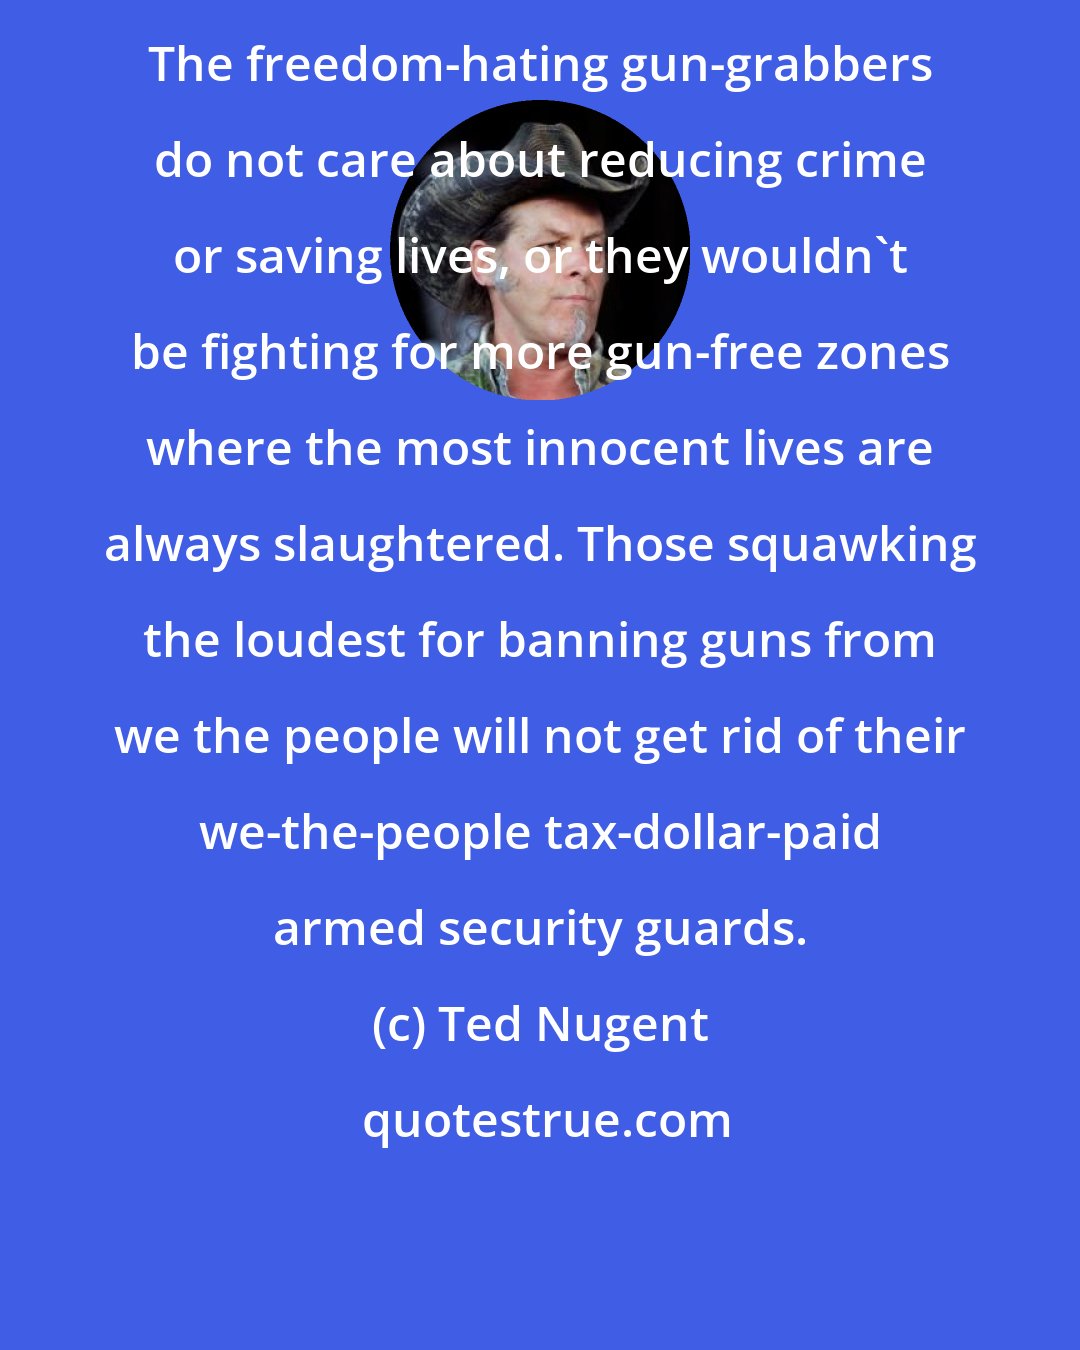 Ted Nugent: The freedom-hating gun-grabbers do not care about reducing crime or saving lives, or they wouldn't be fighting for more gun-free zones where the most innocent lives are always slaughtered. Those squawking the loudest for banning guns from we the people will not get rid of their we-the-people tax-dollar-paid armed security guards.